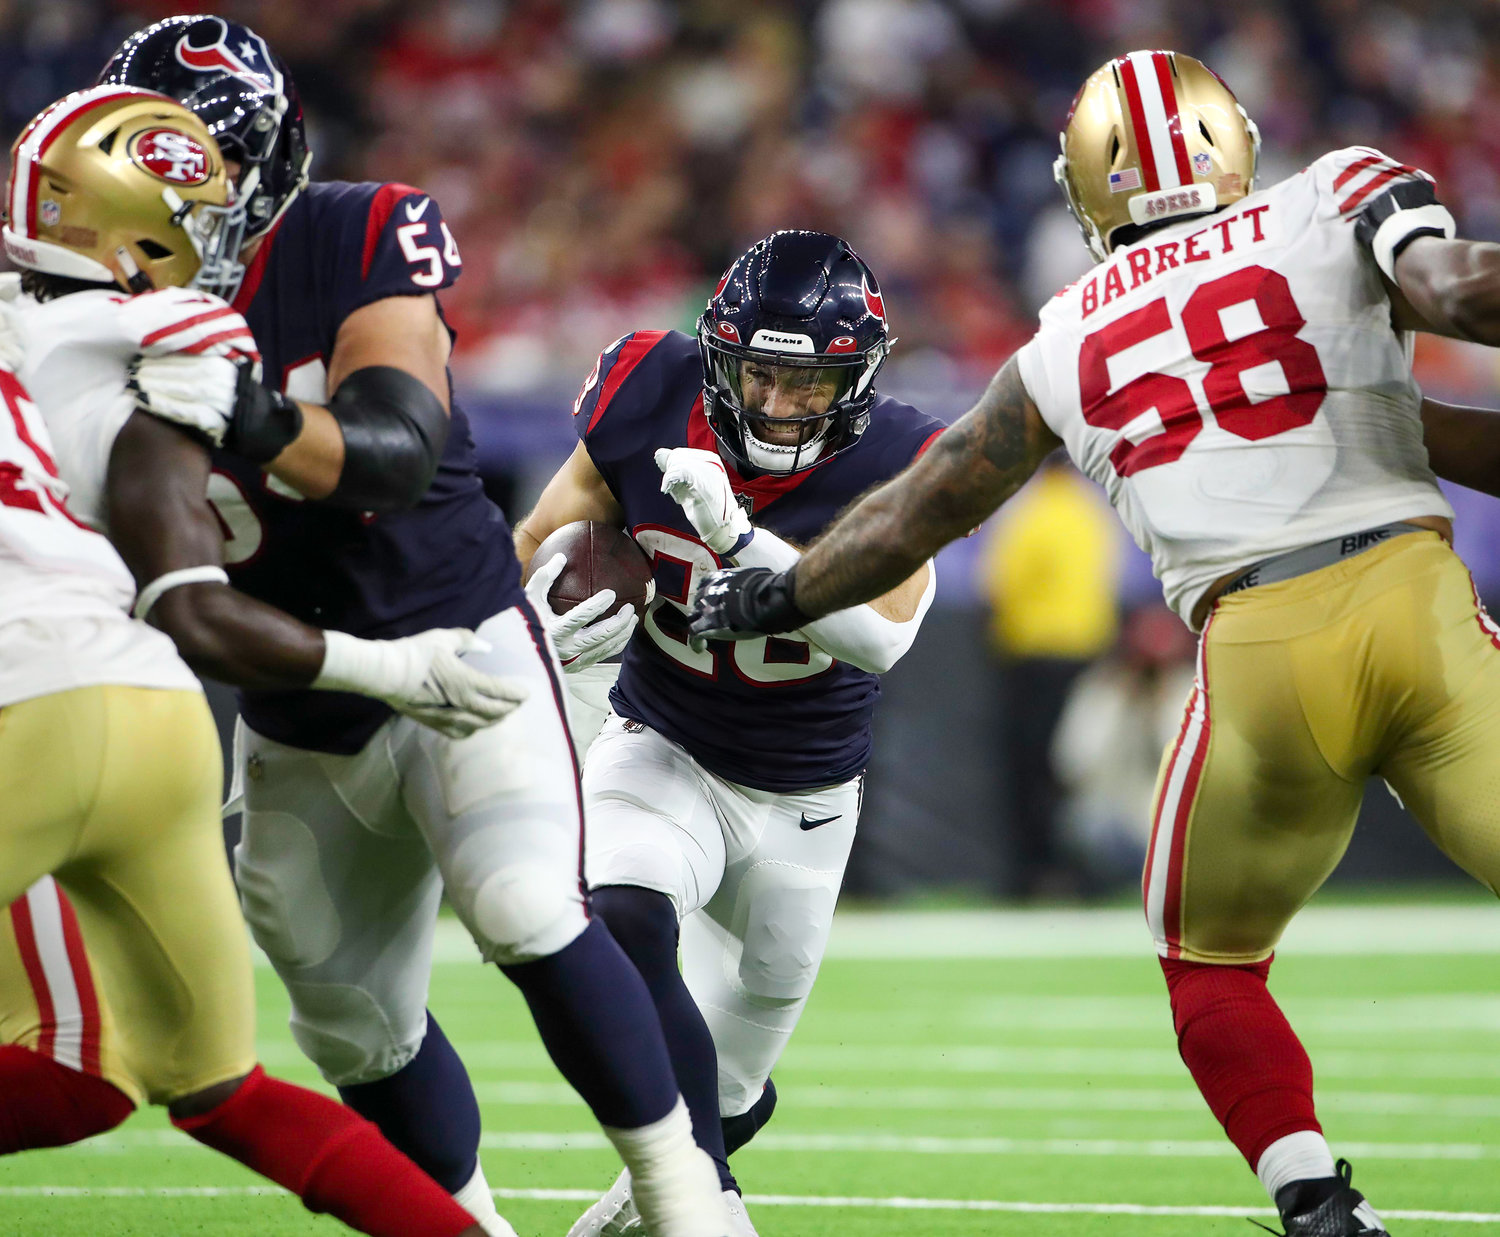 Houston Texans running back Rex Burkhead (28) carries the ball during an NFL preseason game between the Texans and the 49ers in Houston, Texas, on August 25, 2022.